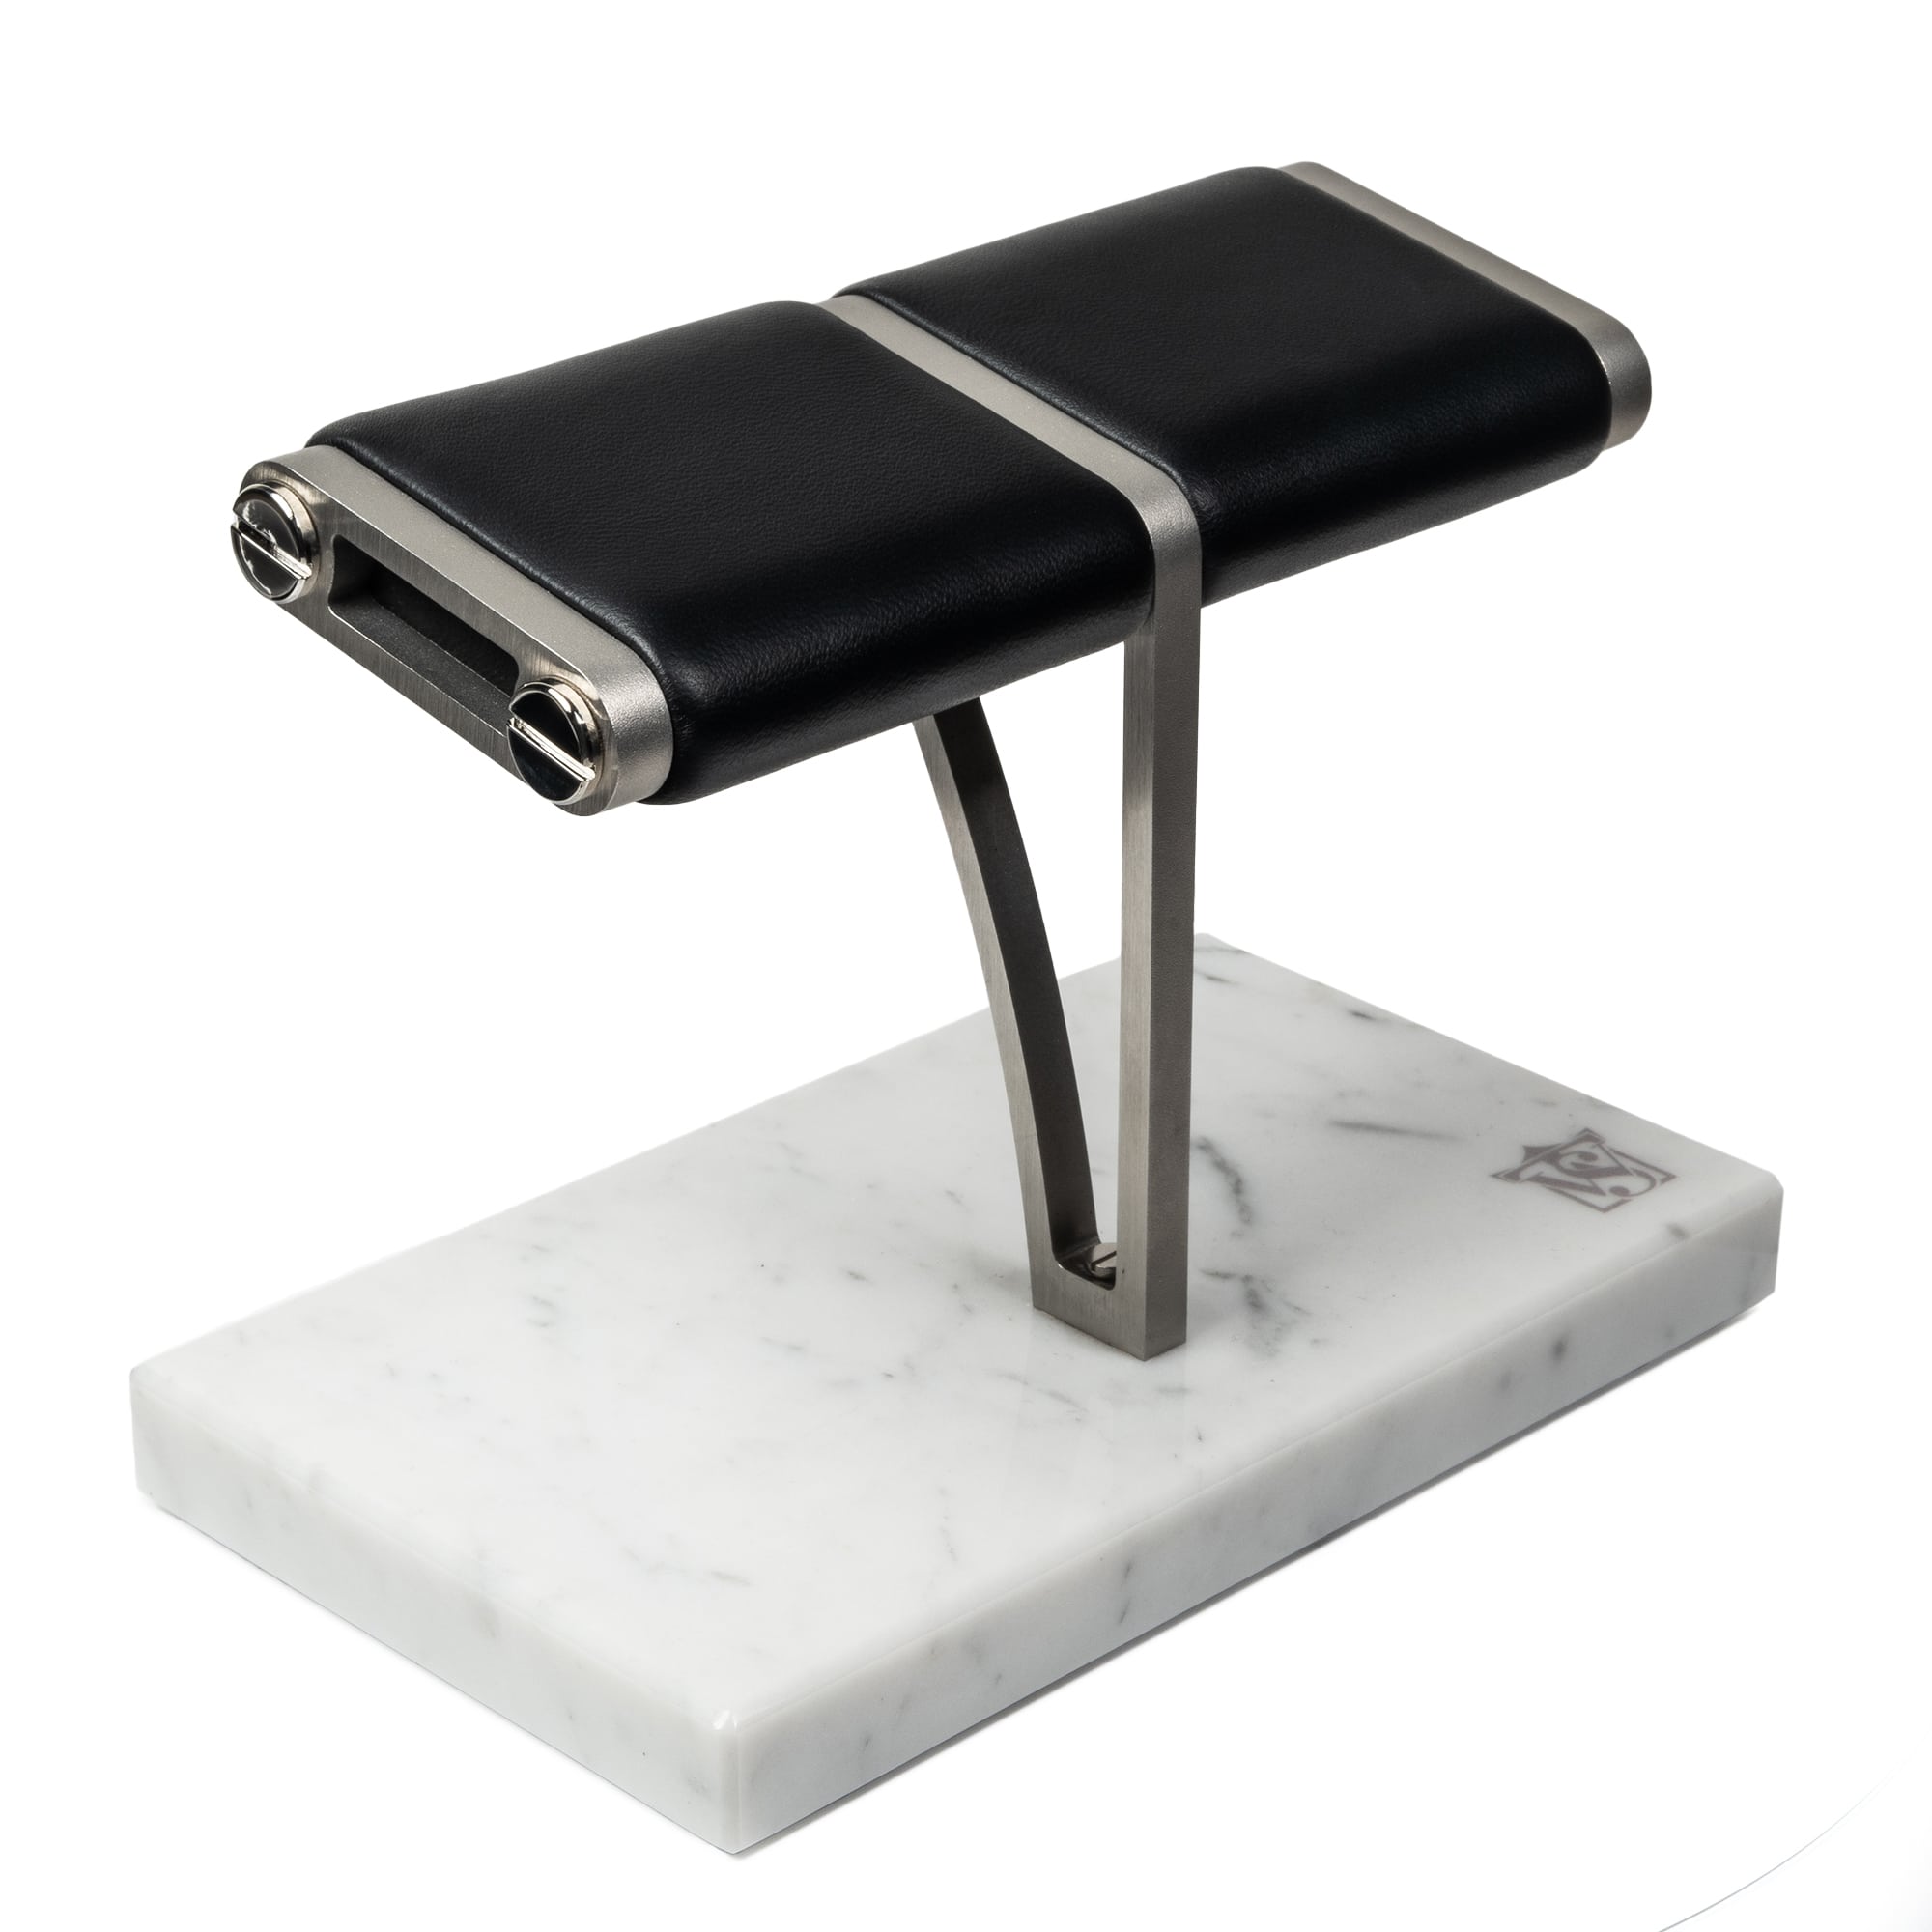 WATCH STAND 2.0 - DOUBLE - WHITE & SILVER